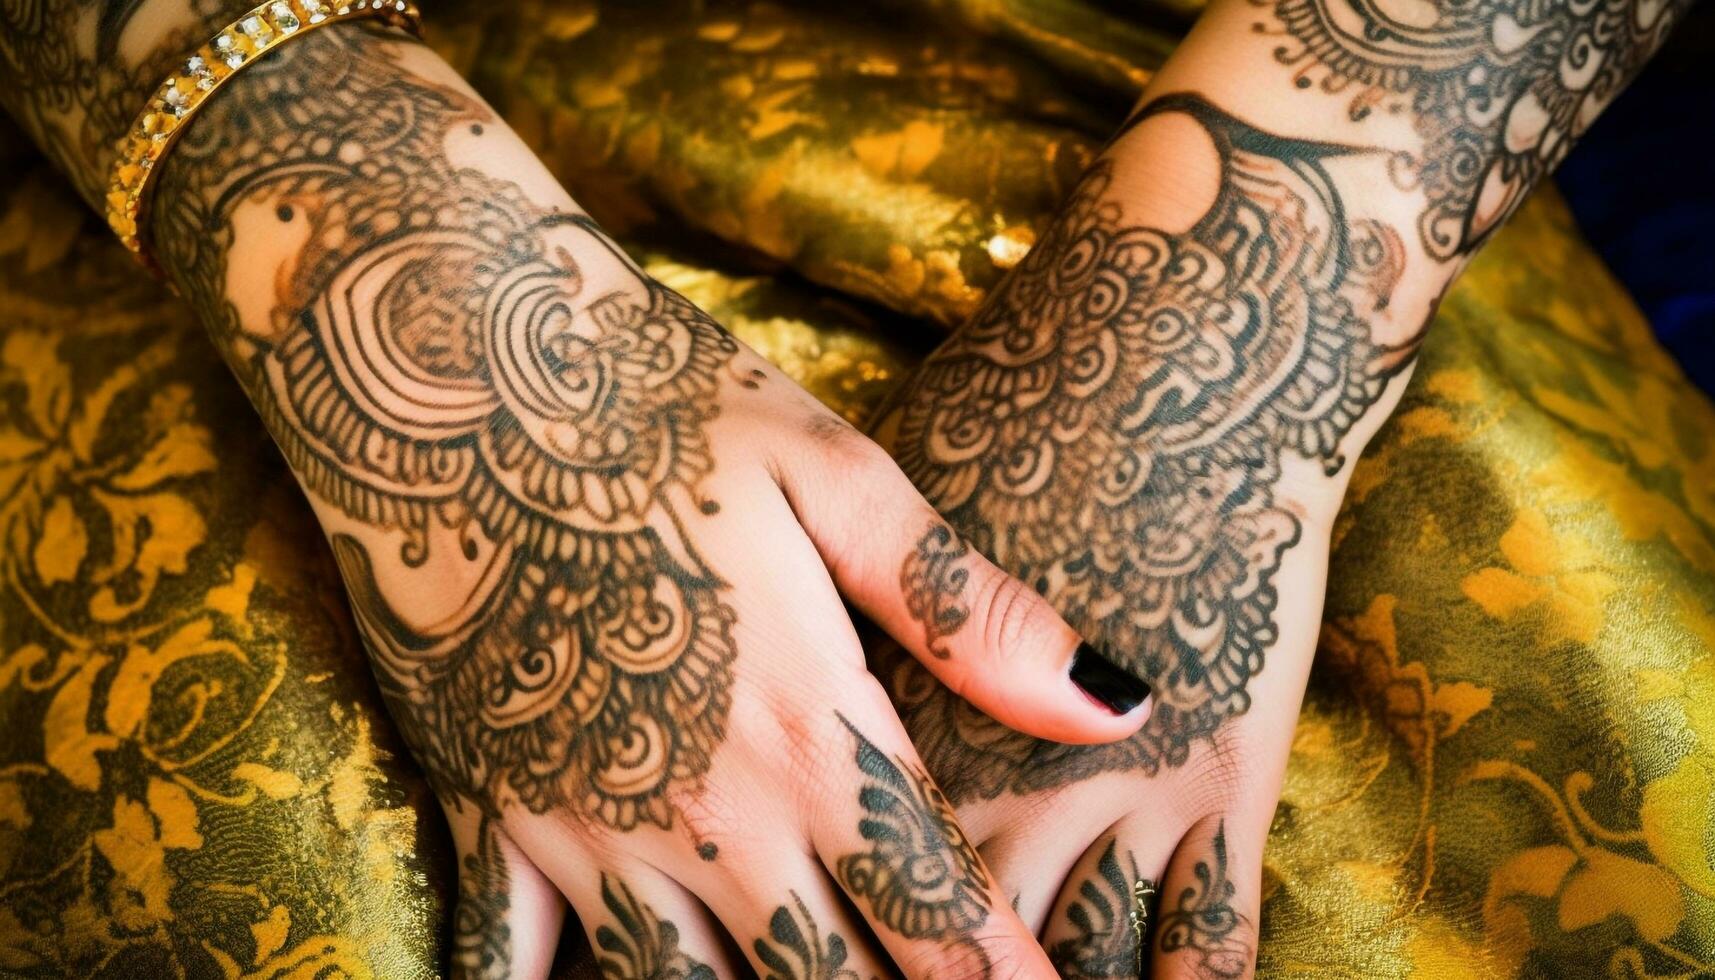 Two young women with henna tattoos showcase ornate body adornment generated by AI photo